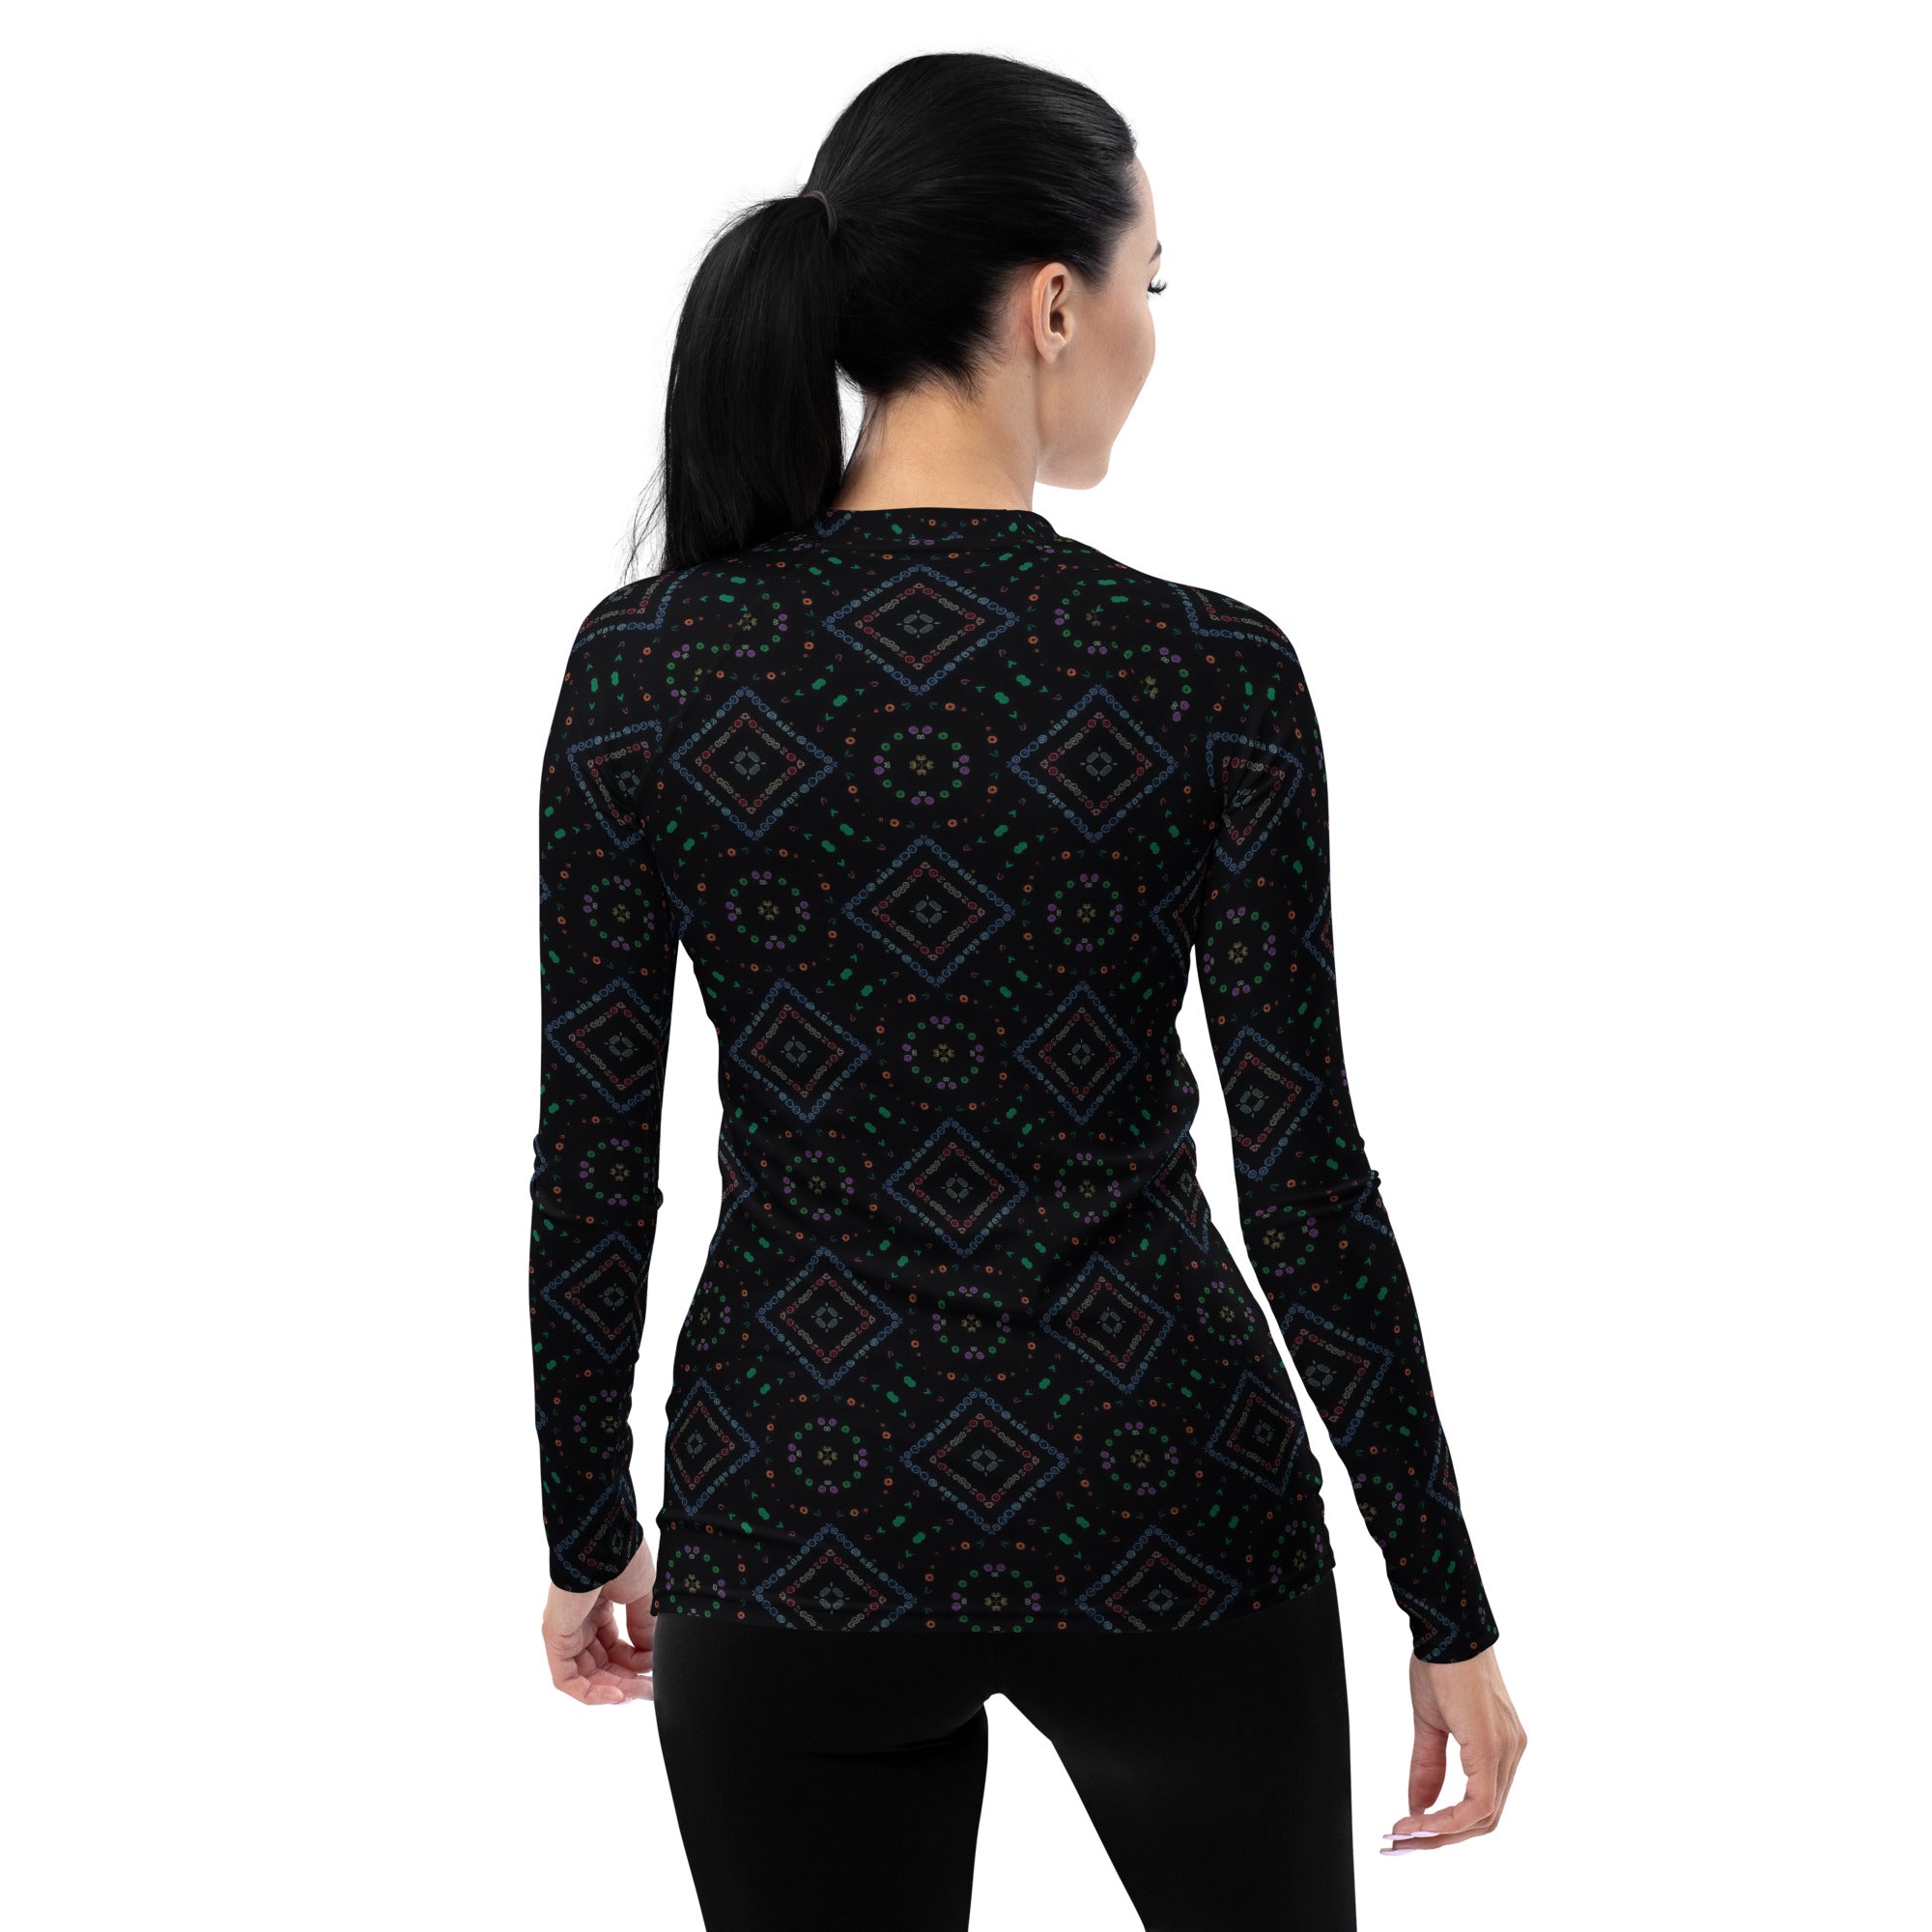 Close-up of Floral Fusion Beauty Rash Guard's intricate floral design.